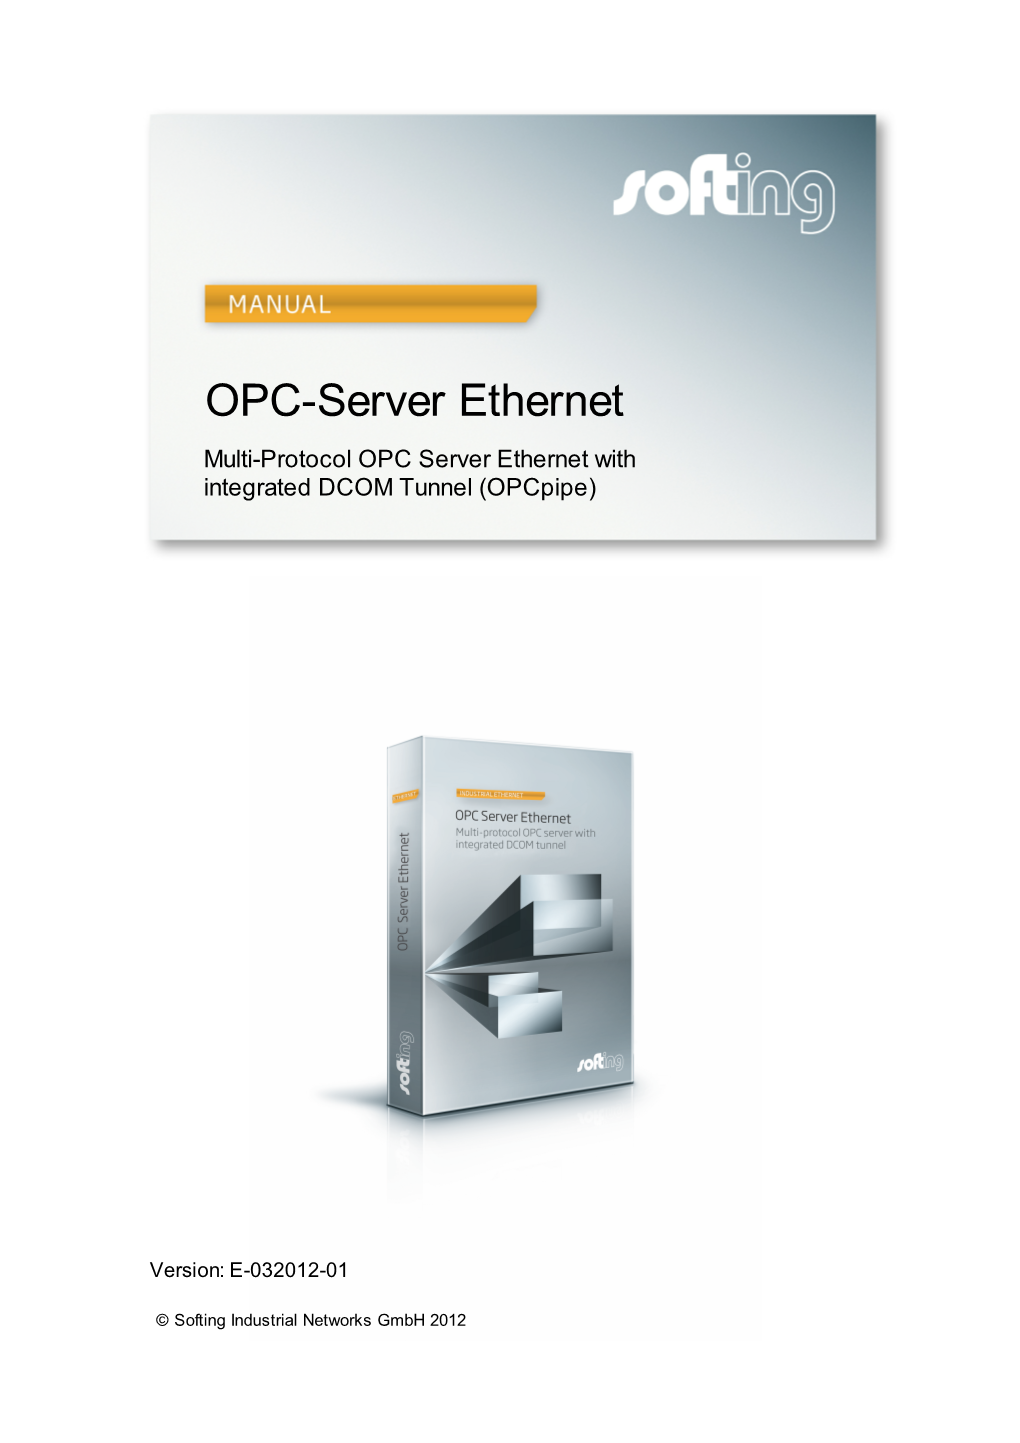 OPC-Server Ethernet Multi-Protocol OPC Server Ethernet with Integrated DCOM Tunnel (Opcpipe)